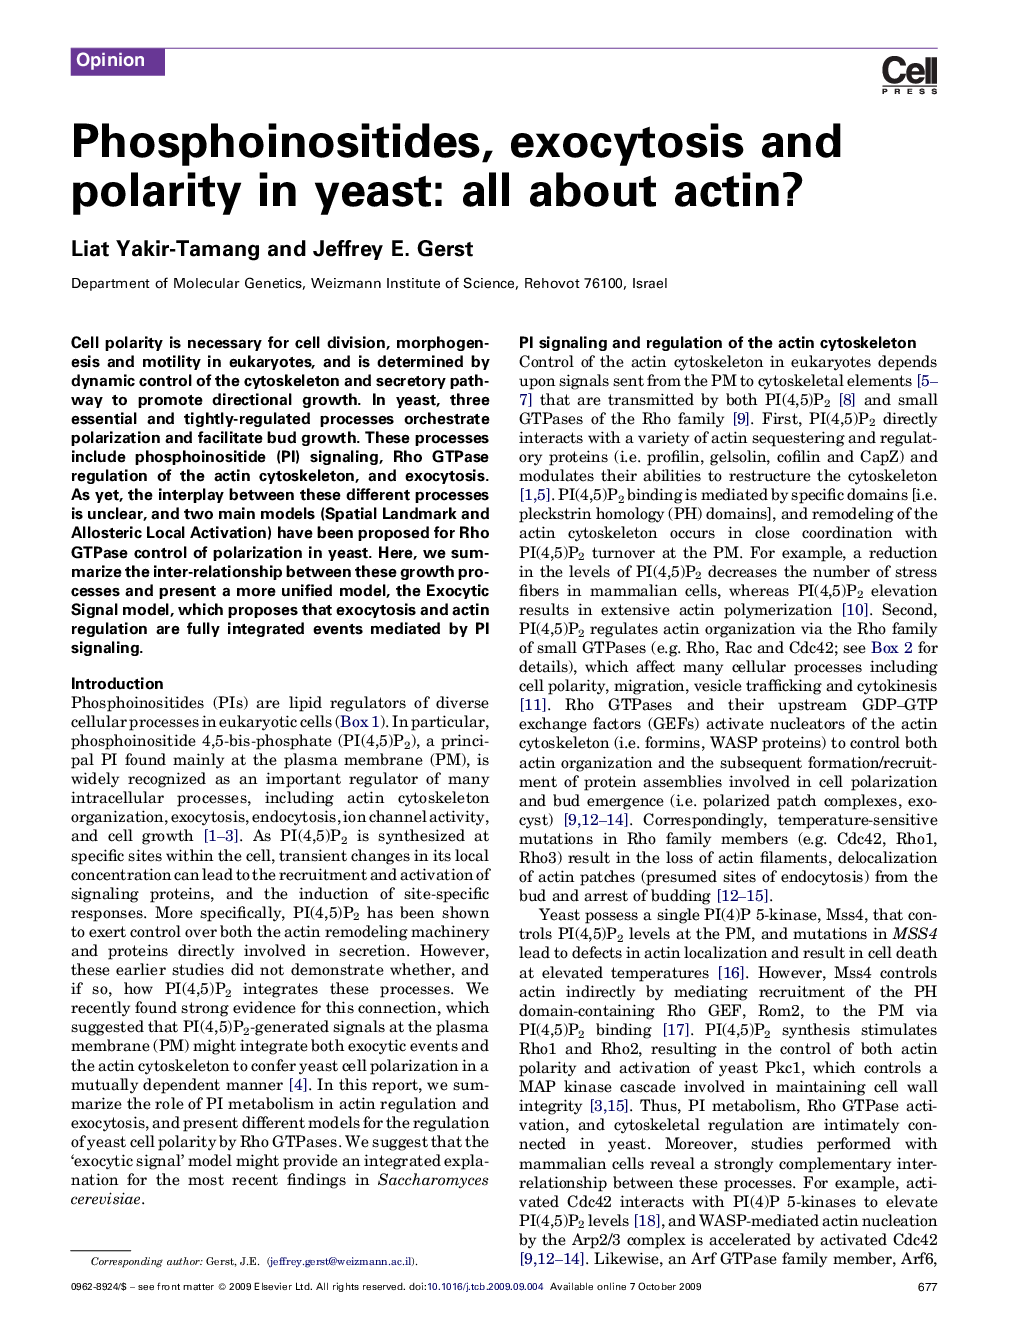 Phosphoinositides, exocytosis and polarity in yeast: all about actin?